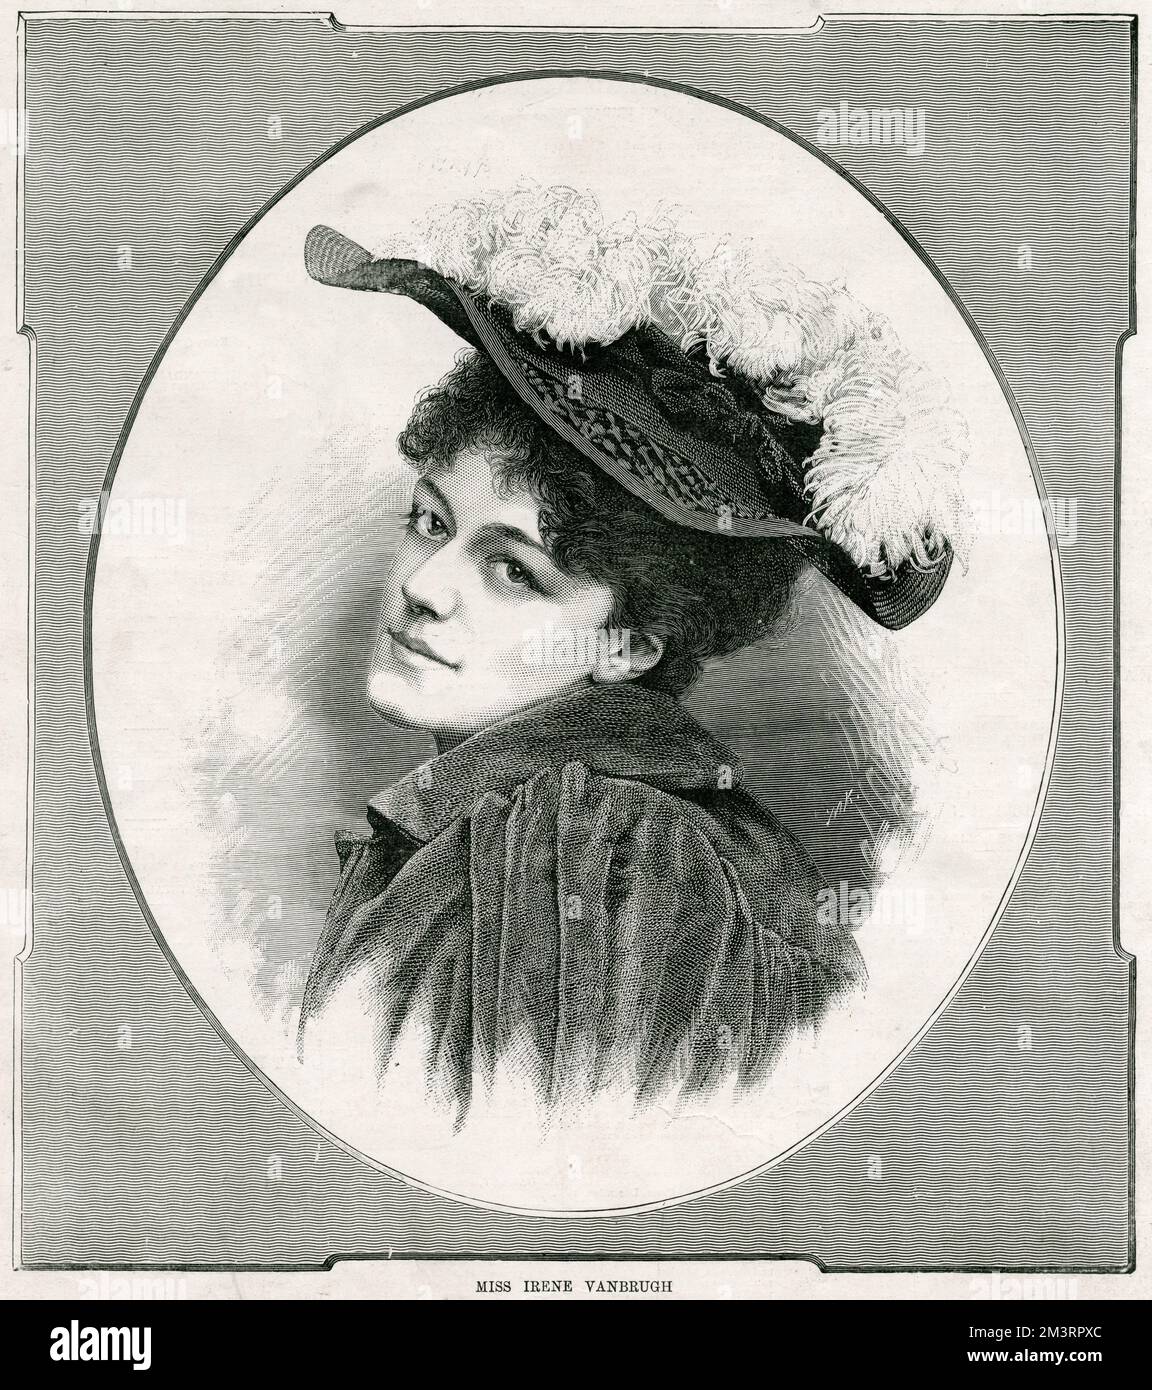 Dame Irene Vanbrugh DBE (1872 - 1949), English actress and comidienne, followed her elder sister Violet into the theatrical profession and sustained a career for more than 50 years. Illustration showing here in the Haymarket Theatre.     Date: 1893 Stock Photo